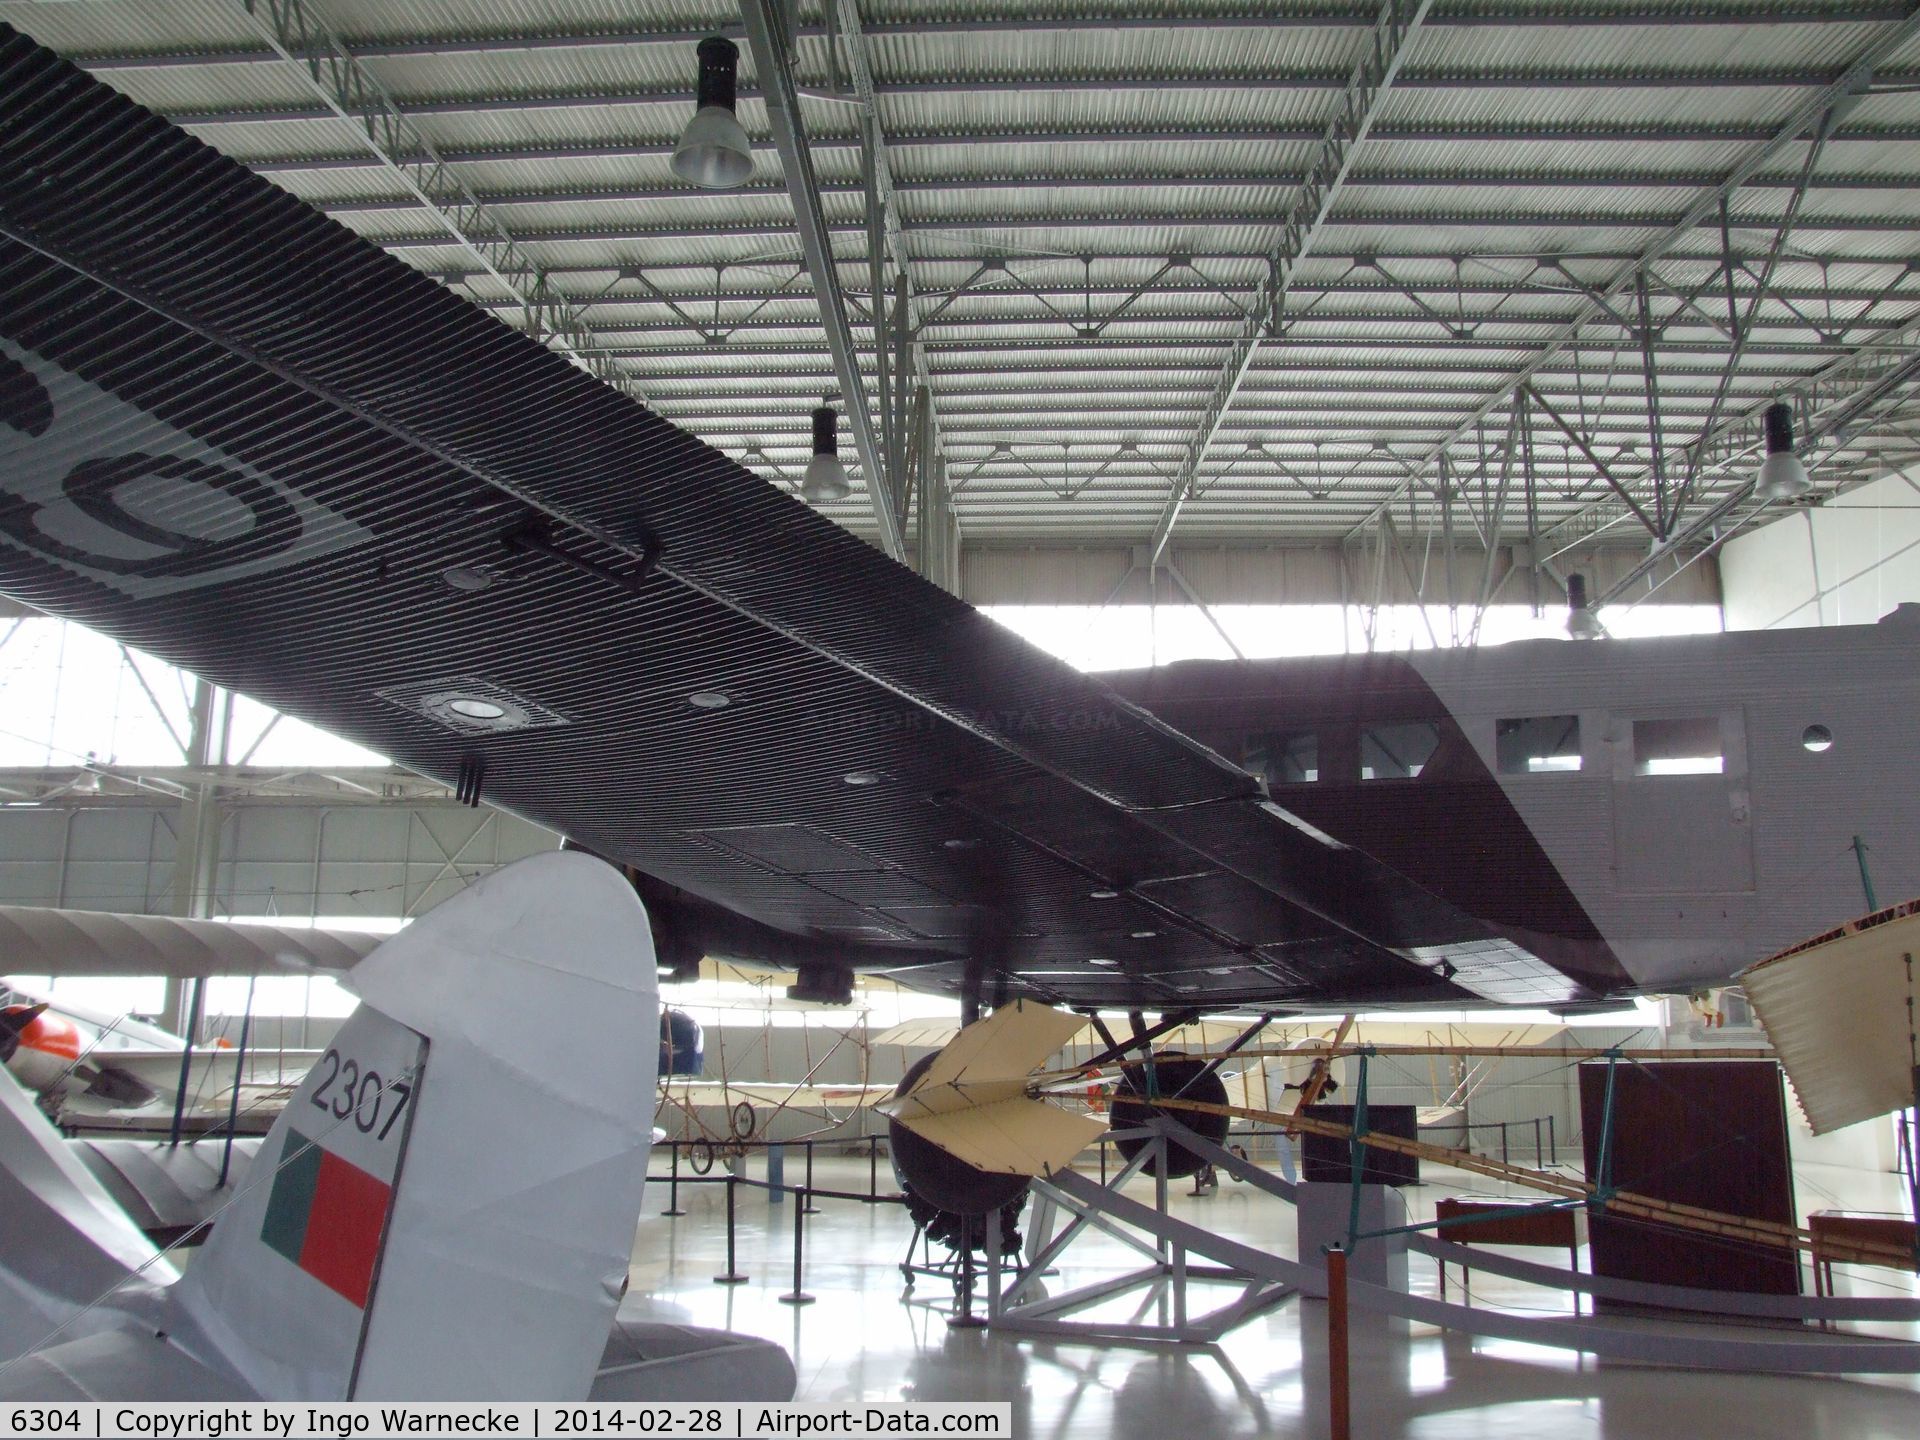 6304, Junkers Ju-52/3mg3e C/N 5661, Junkers Ju 52/3m g3e (converted to Pratt & Whitney engines) at the Museu do Ar, Sintra